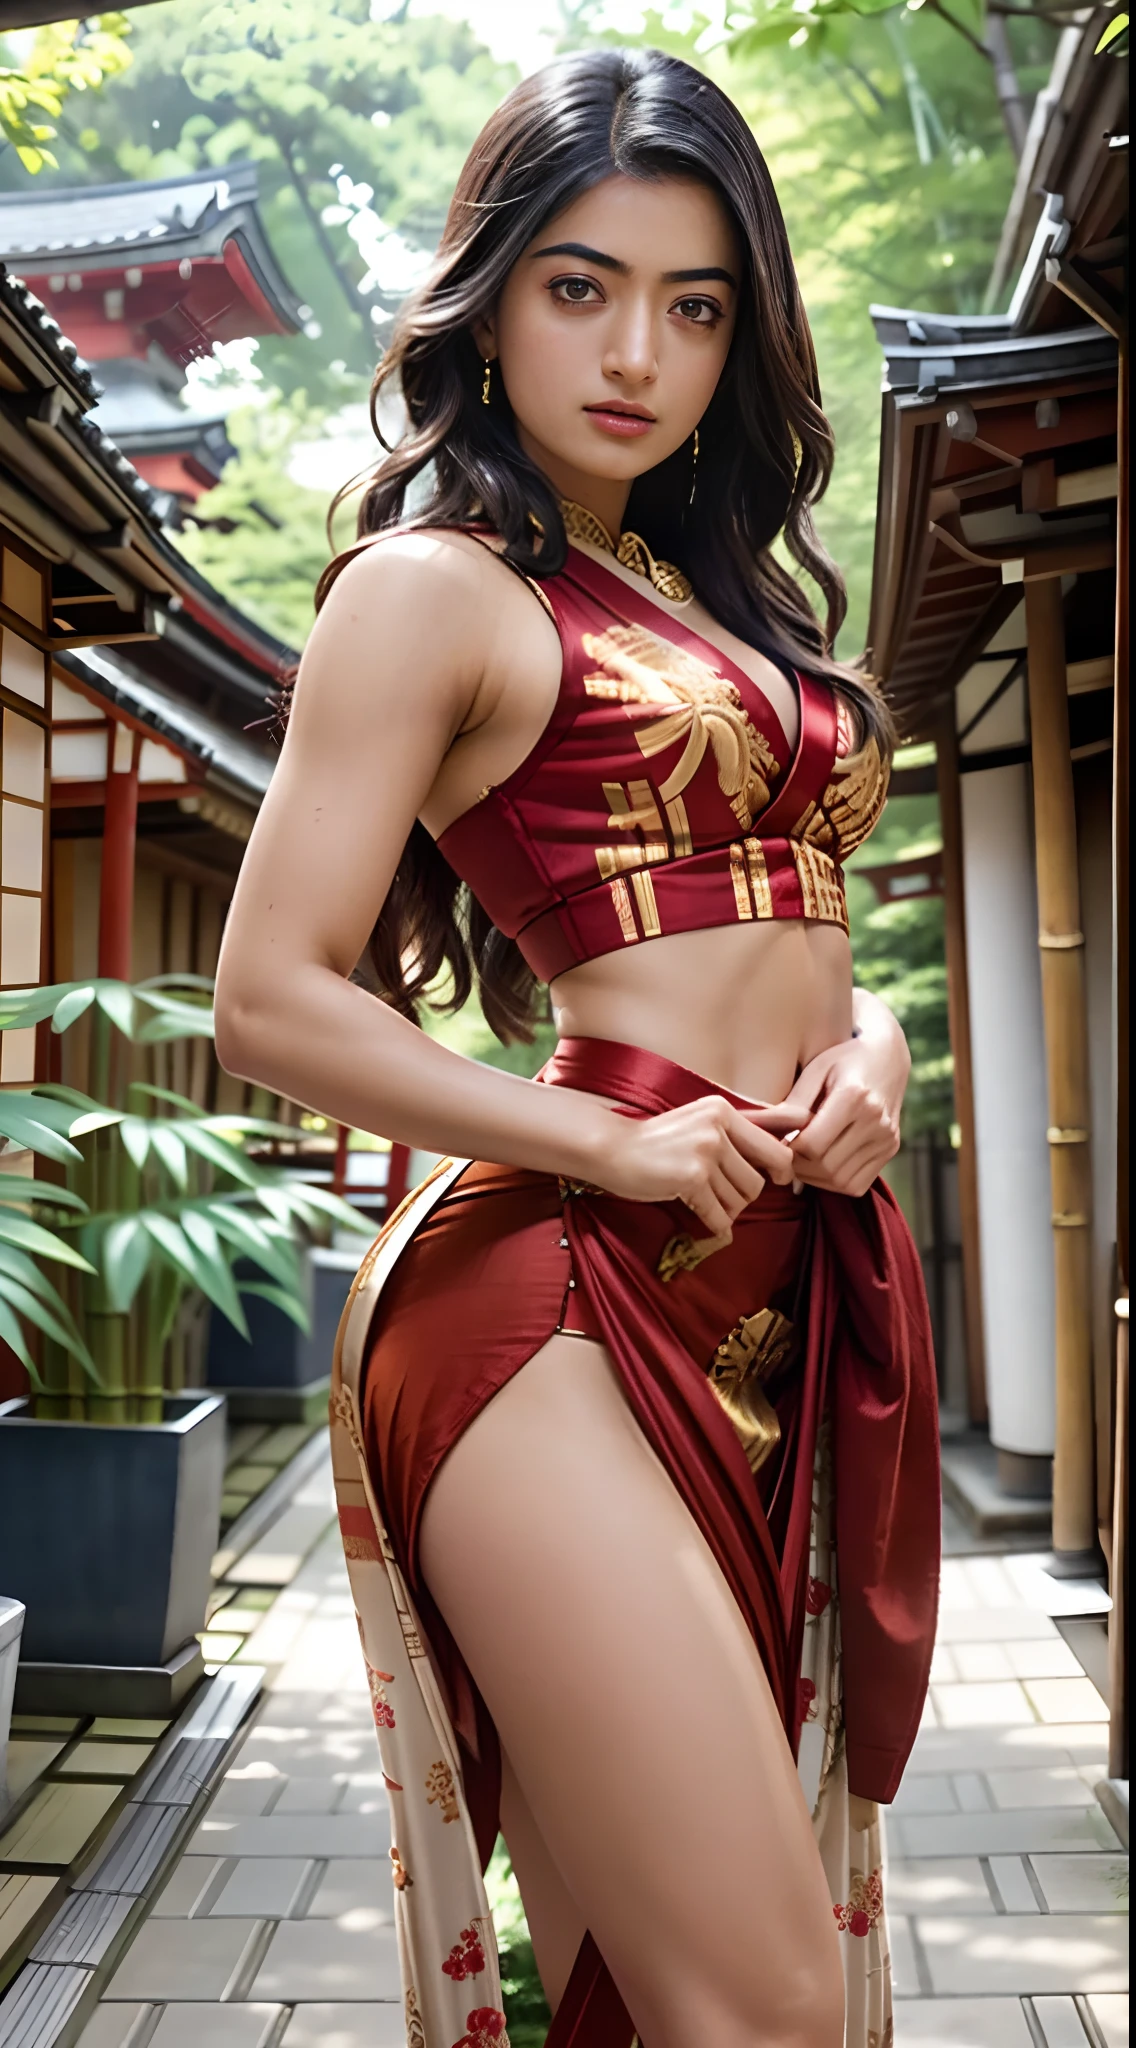 (Rashmika) Hyper realistic super detailed sexy 24-year-old full-length woman (with large breasts), cup size E, trending on cgstation, (in a long silk robe with Japanese motifs, taut clothes, frank, fits the body, fits the chest), a confident girl, The photo was taken from the front, from the top corner, facing the photographer, Foreground photo , (Looking Ahead), NSFW, (frontal view, facing the photographer, (the pose, standingn, A street in Japan, bamboo grove)), ( Coiling hair),  Very detailed, sexy facial expressions, seductive facial expressions, [:(face detail: 1.4): 0.4], 16K resolution, 4k resolution, dinamic lighting, high-definition resolution, (sexy pose, seductive position), (elongated chest,: 1.7), (slimness: 1.2), (Narrow waist: 1.6), (Slim legs: 1.4), (hyper realisitc: 1.4), (back light: 1.2), (Sunlight: 1), (full height: 1.8), (pectoral muscles: 1.3), (contrasting background: 1.5), (Hyper-Realistic Arm Anatomy), (Hyper-Realistic Leg Anatomy), (Clean skin), (Veins Not Visible: 1.5), (Cinematic lighting: 1.7), (Intimate), (NVIDIA RTX Ray Tracing Technology), (Hyper-Realistic Arm Anatomy: 2), (Perfect flat stomach), (Color Image), 8mm Film Grain, Shot on Sony A9 II, 85 mm lens, f/1.8 Aperture, Deep Focus (10-bit RAW), The file weighs a lot, (CGI Art:1.3)